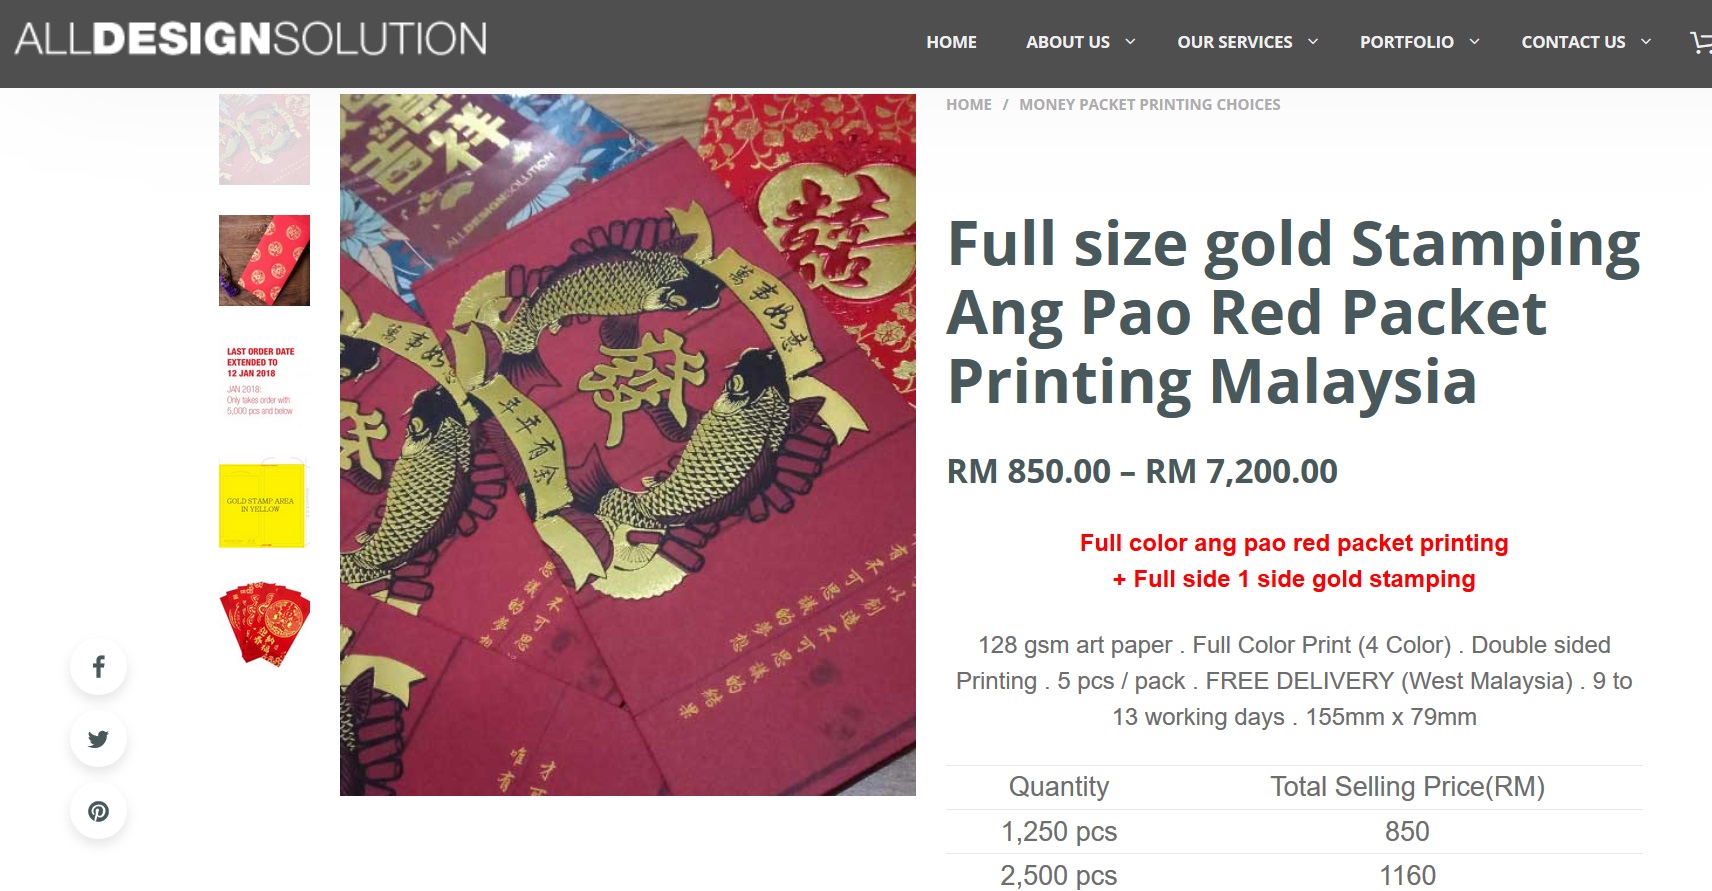 Ang Pao Red Packet Printing Malaysia – All Design Solution